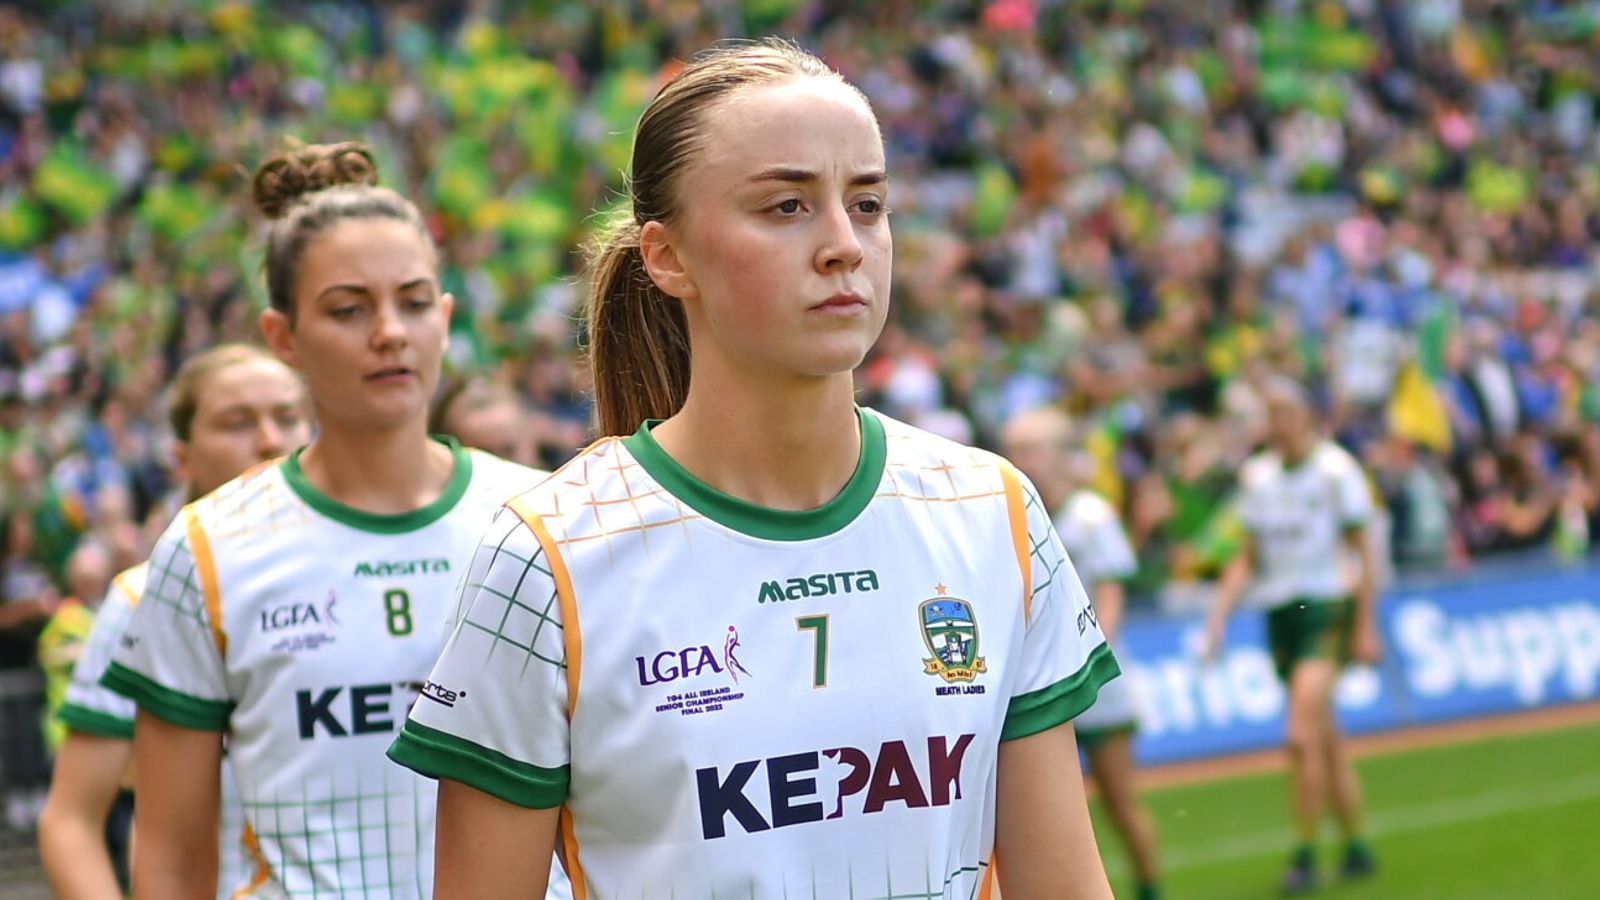 Aoibhin Cleary: Meath can continue upward trajectory despite transition